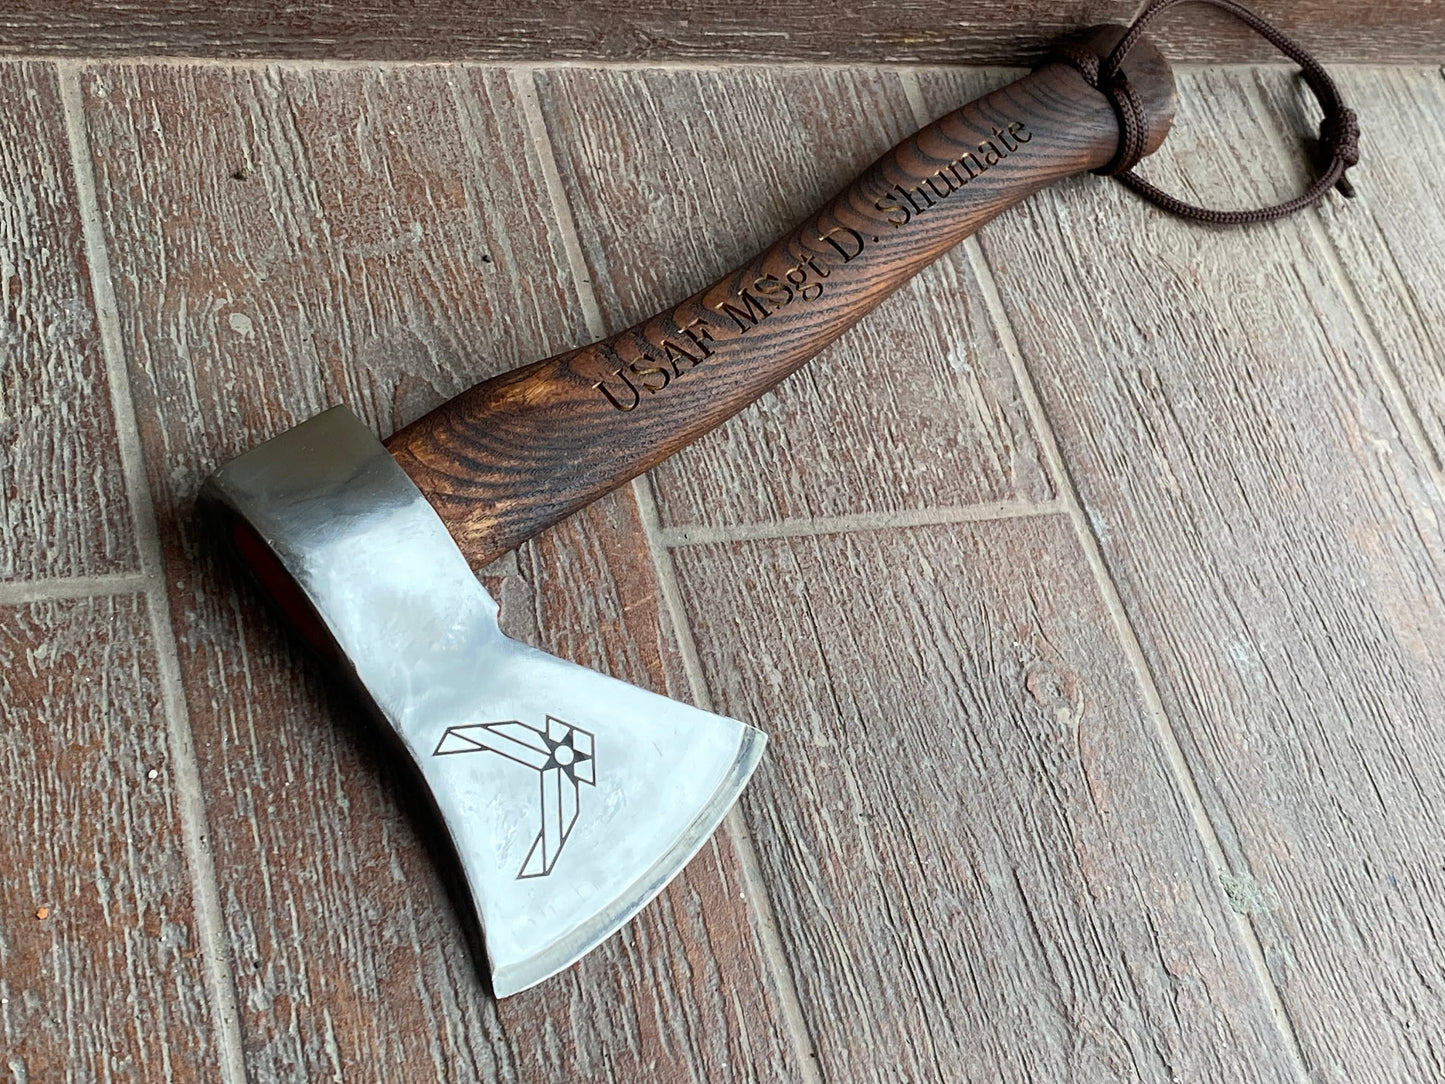 Axe with 2 logos and personalization, hatchet, axe, mens gift, birthday, anniversary, Christmas, camping, personalized gift, groomsman gift